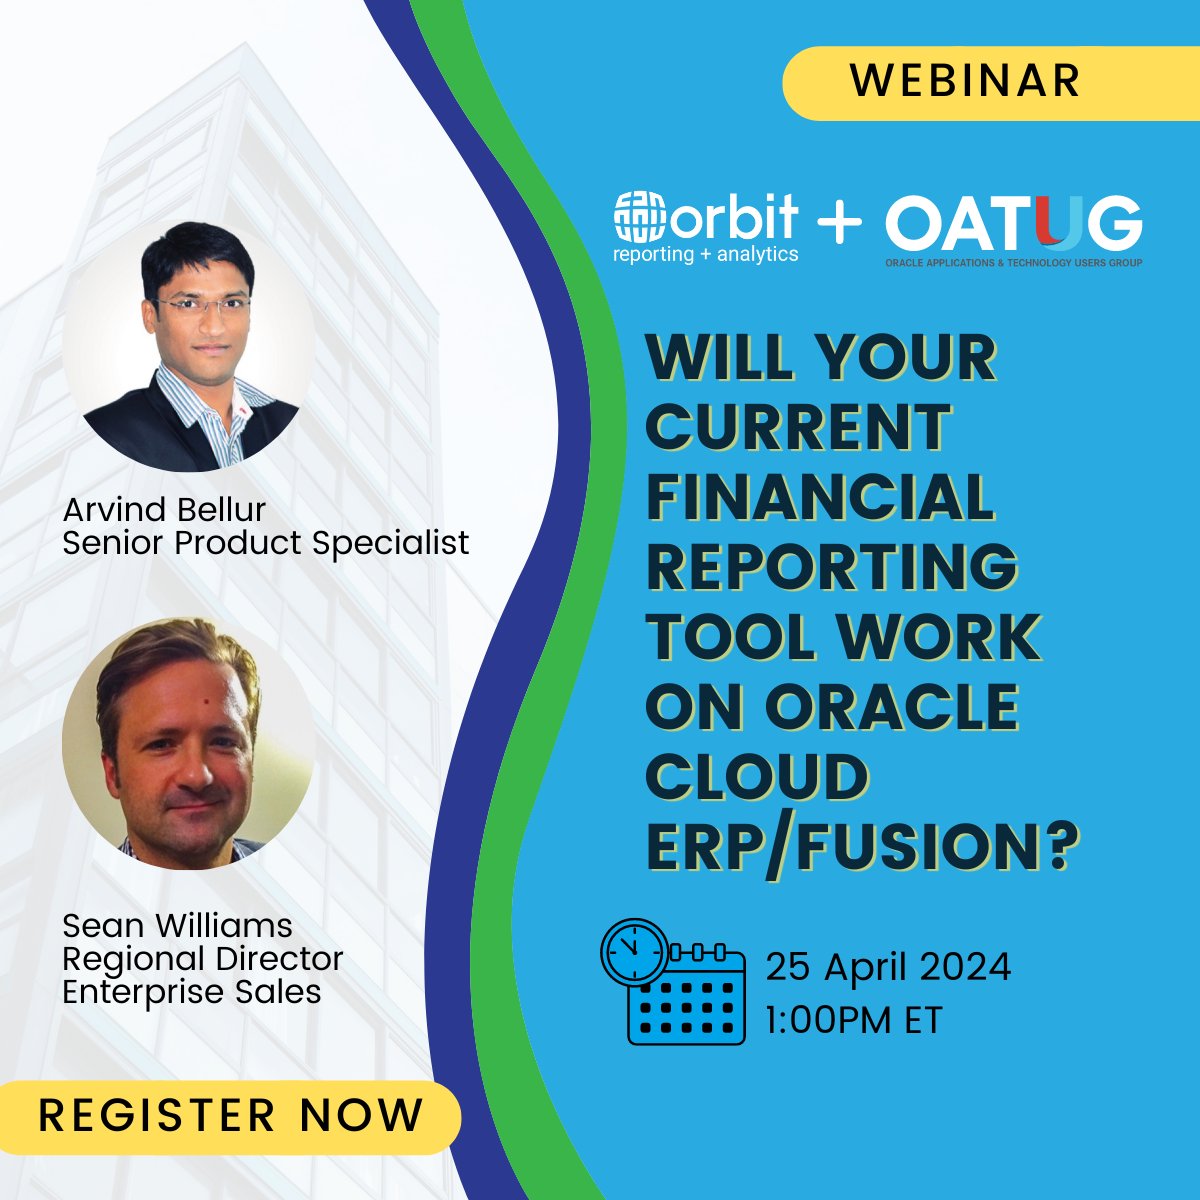 Time is running out to join Arvind & Sean for an exciting webinar in partnership with @OATUG1 WILL YOUR CURRENT FINANCIAL REPORTING TOOL WORK ON ORACLE CLOUD ERP/FUSION? A great opportunity to elevate your #financialreporting process. hubs.la/Q02tTFKg0
#orbitanalytics